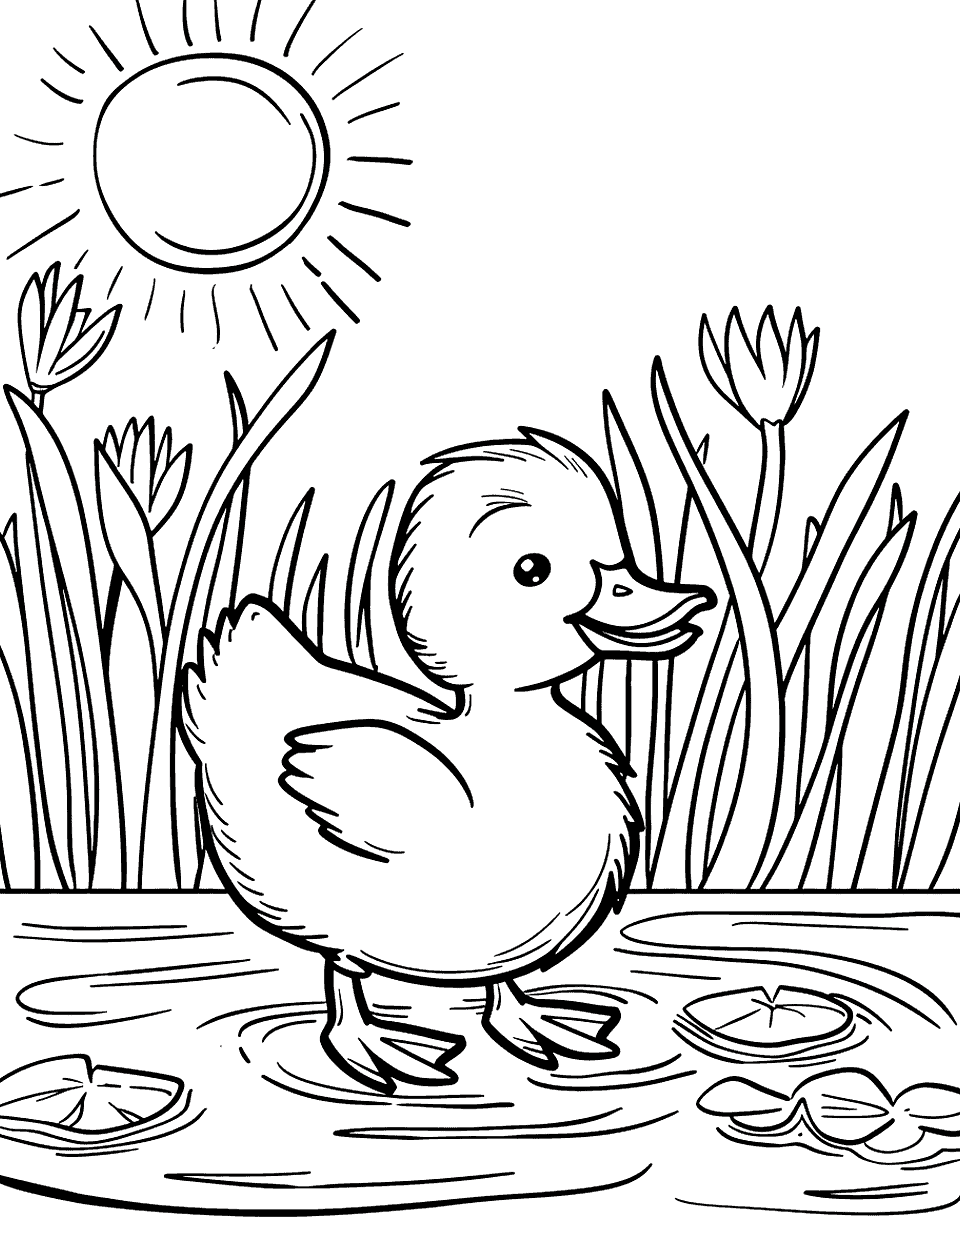 Preschool-Friendly Duck Pond Coloring Page - A simple, preschool-friendly scene of a duck in a small pond with a smiling sun overhead.